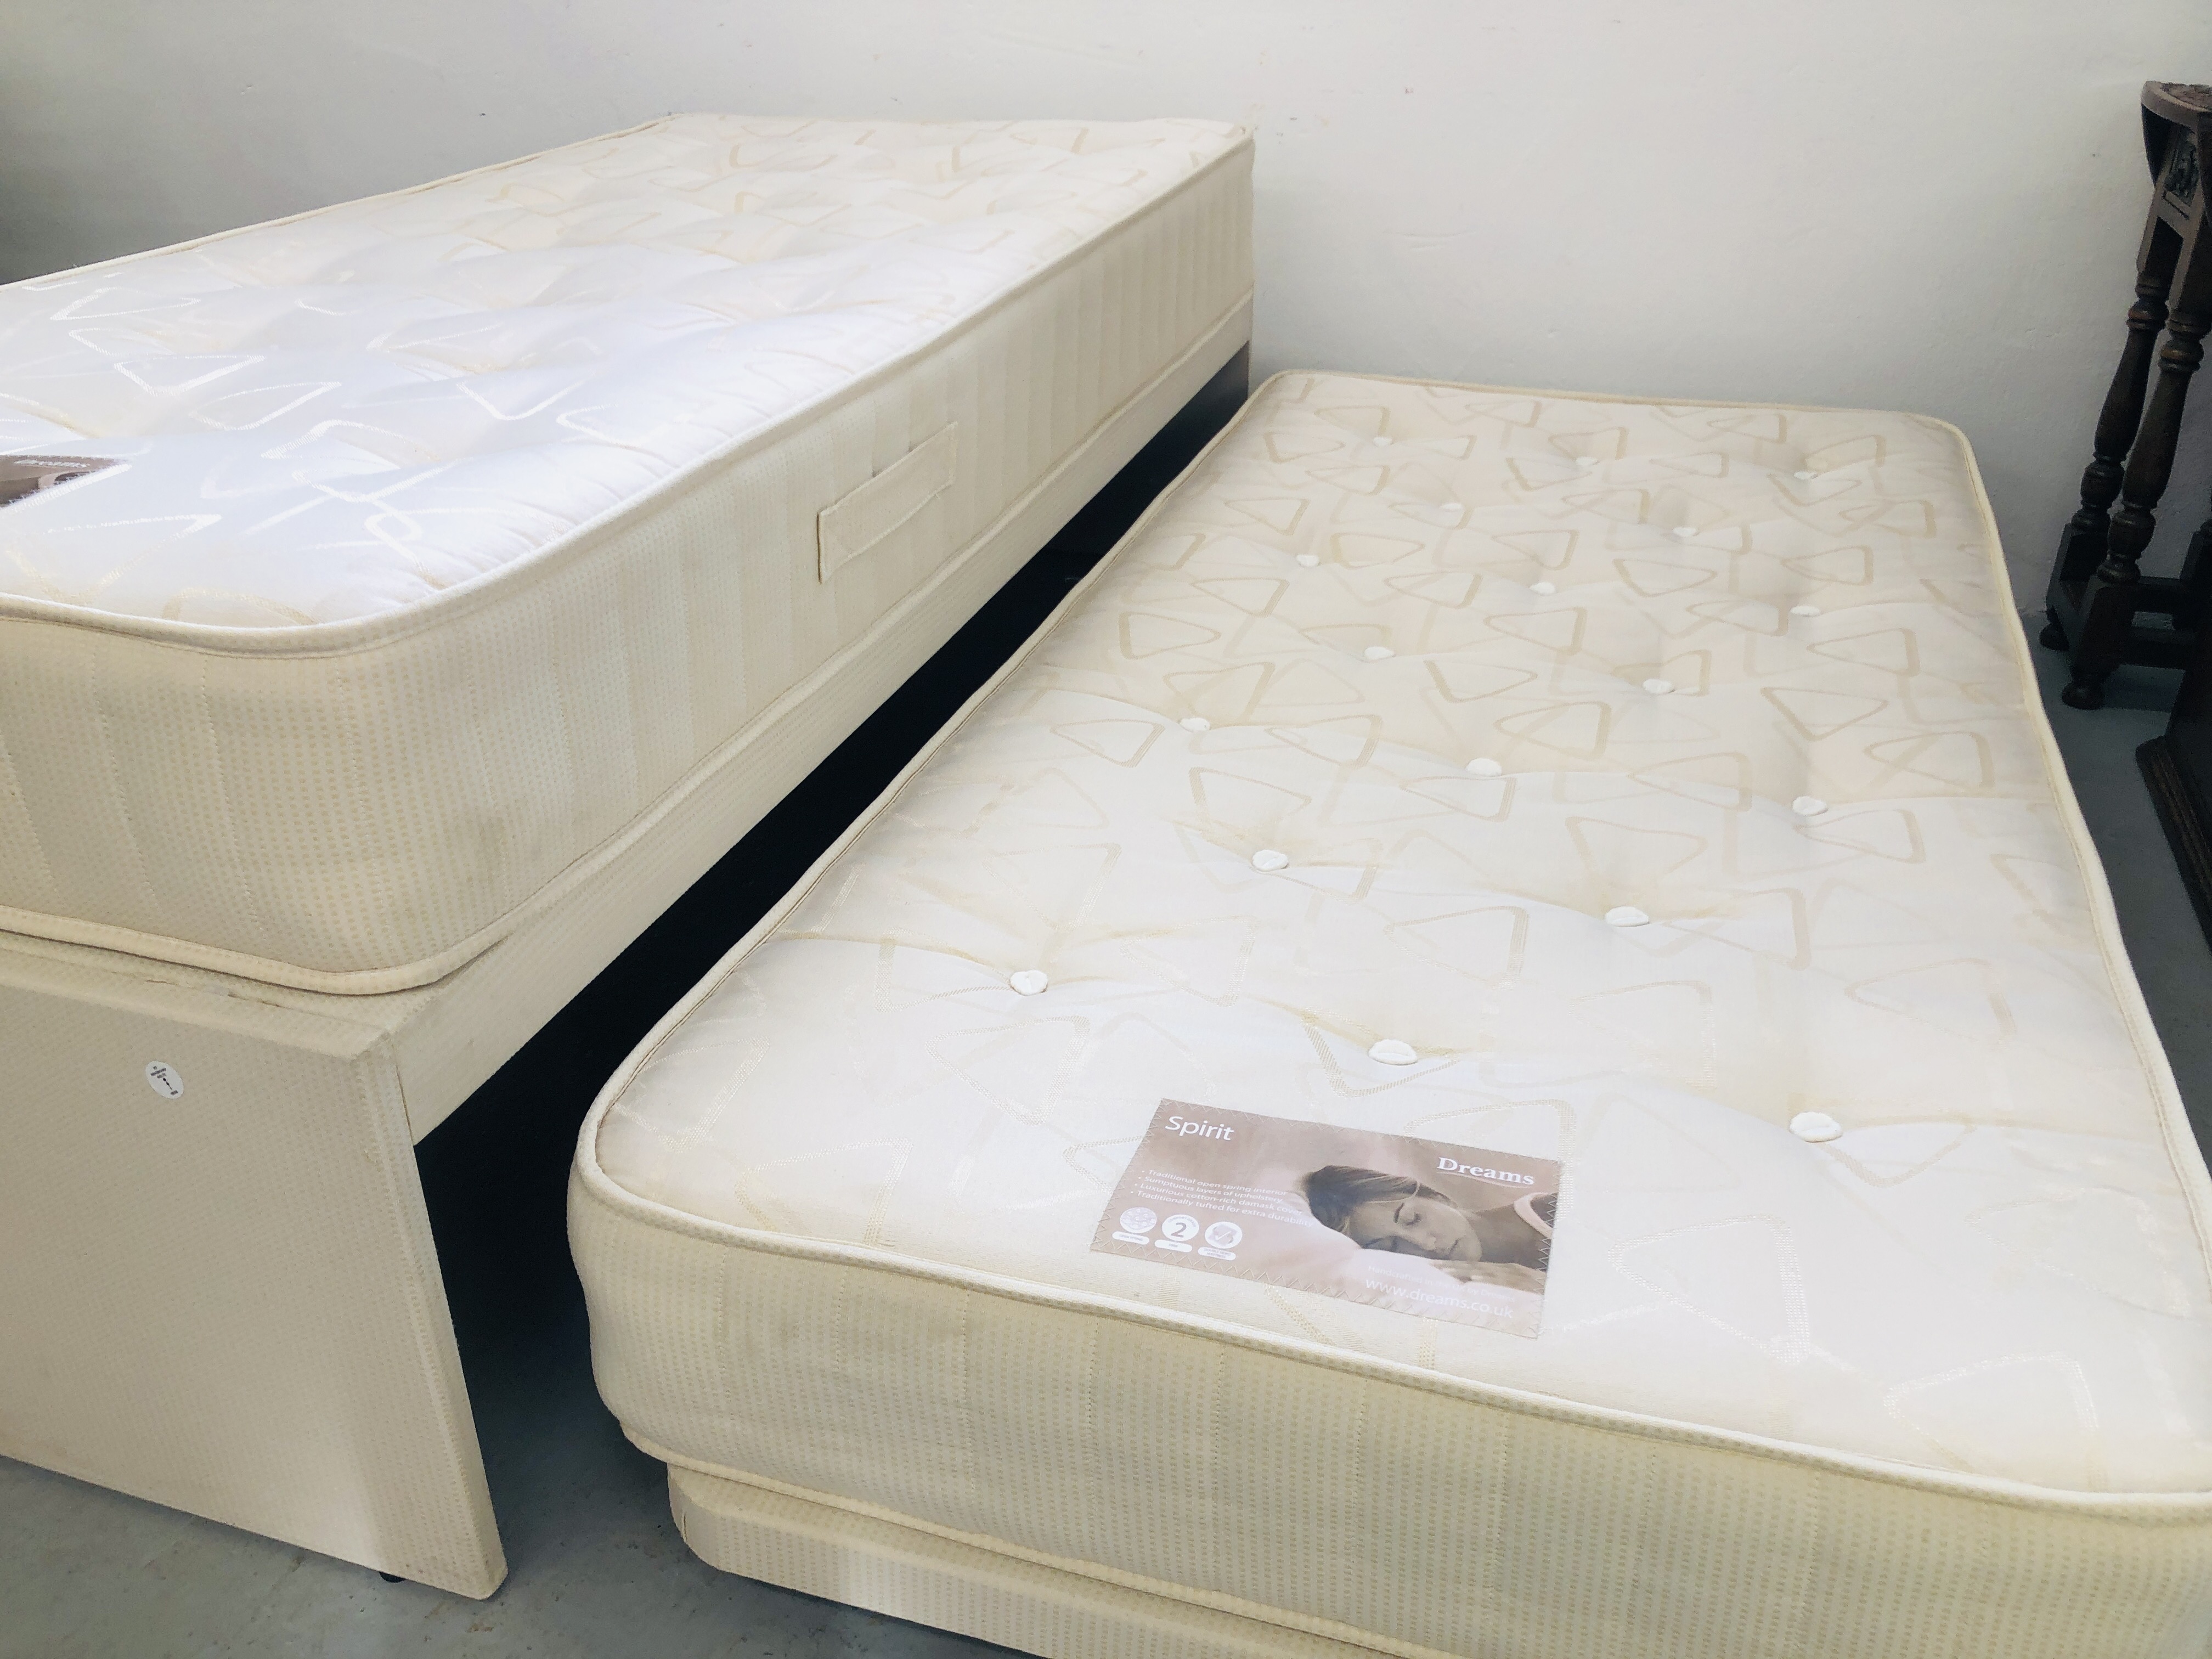 A DREAMS "SPIRIT" SINGLE DIVAN WITH SLIDE OUT GUEST BED BELOW - Image 5 of 5